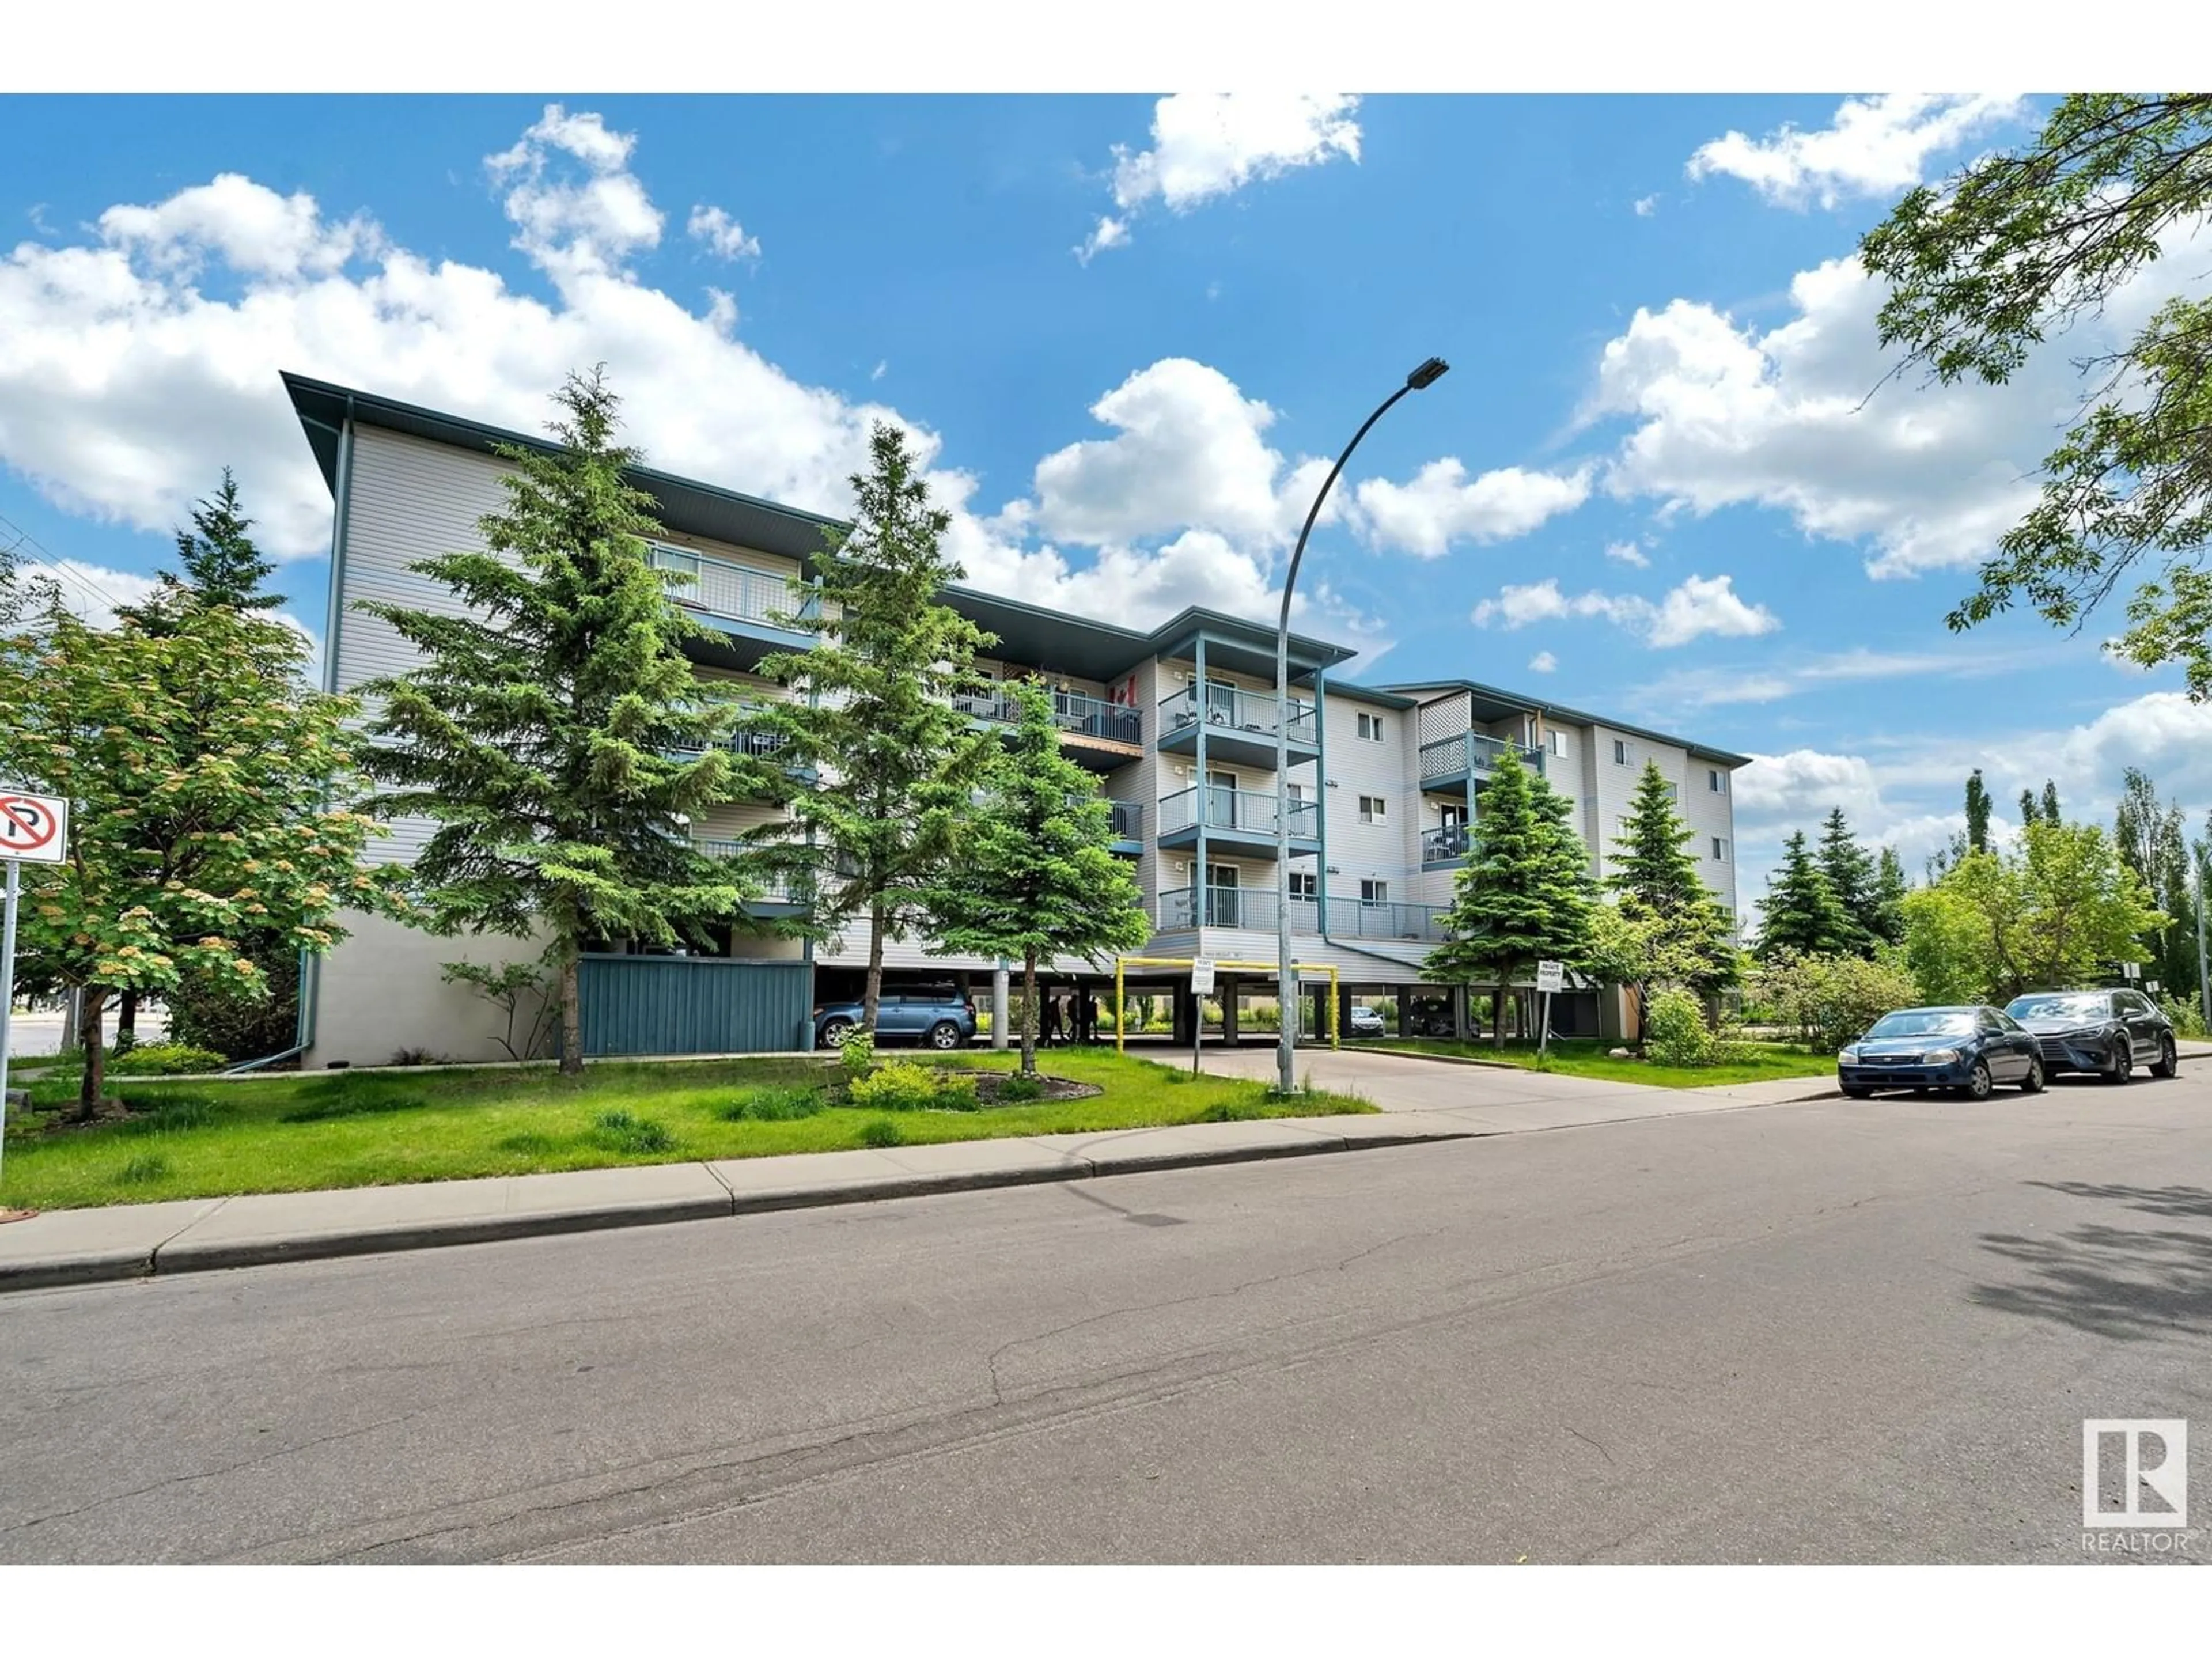 A pic from exterior of the house or condo for #208 8021 115 AV NW, Edmonton Alberta T5B4W7